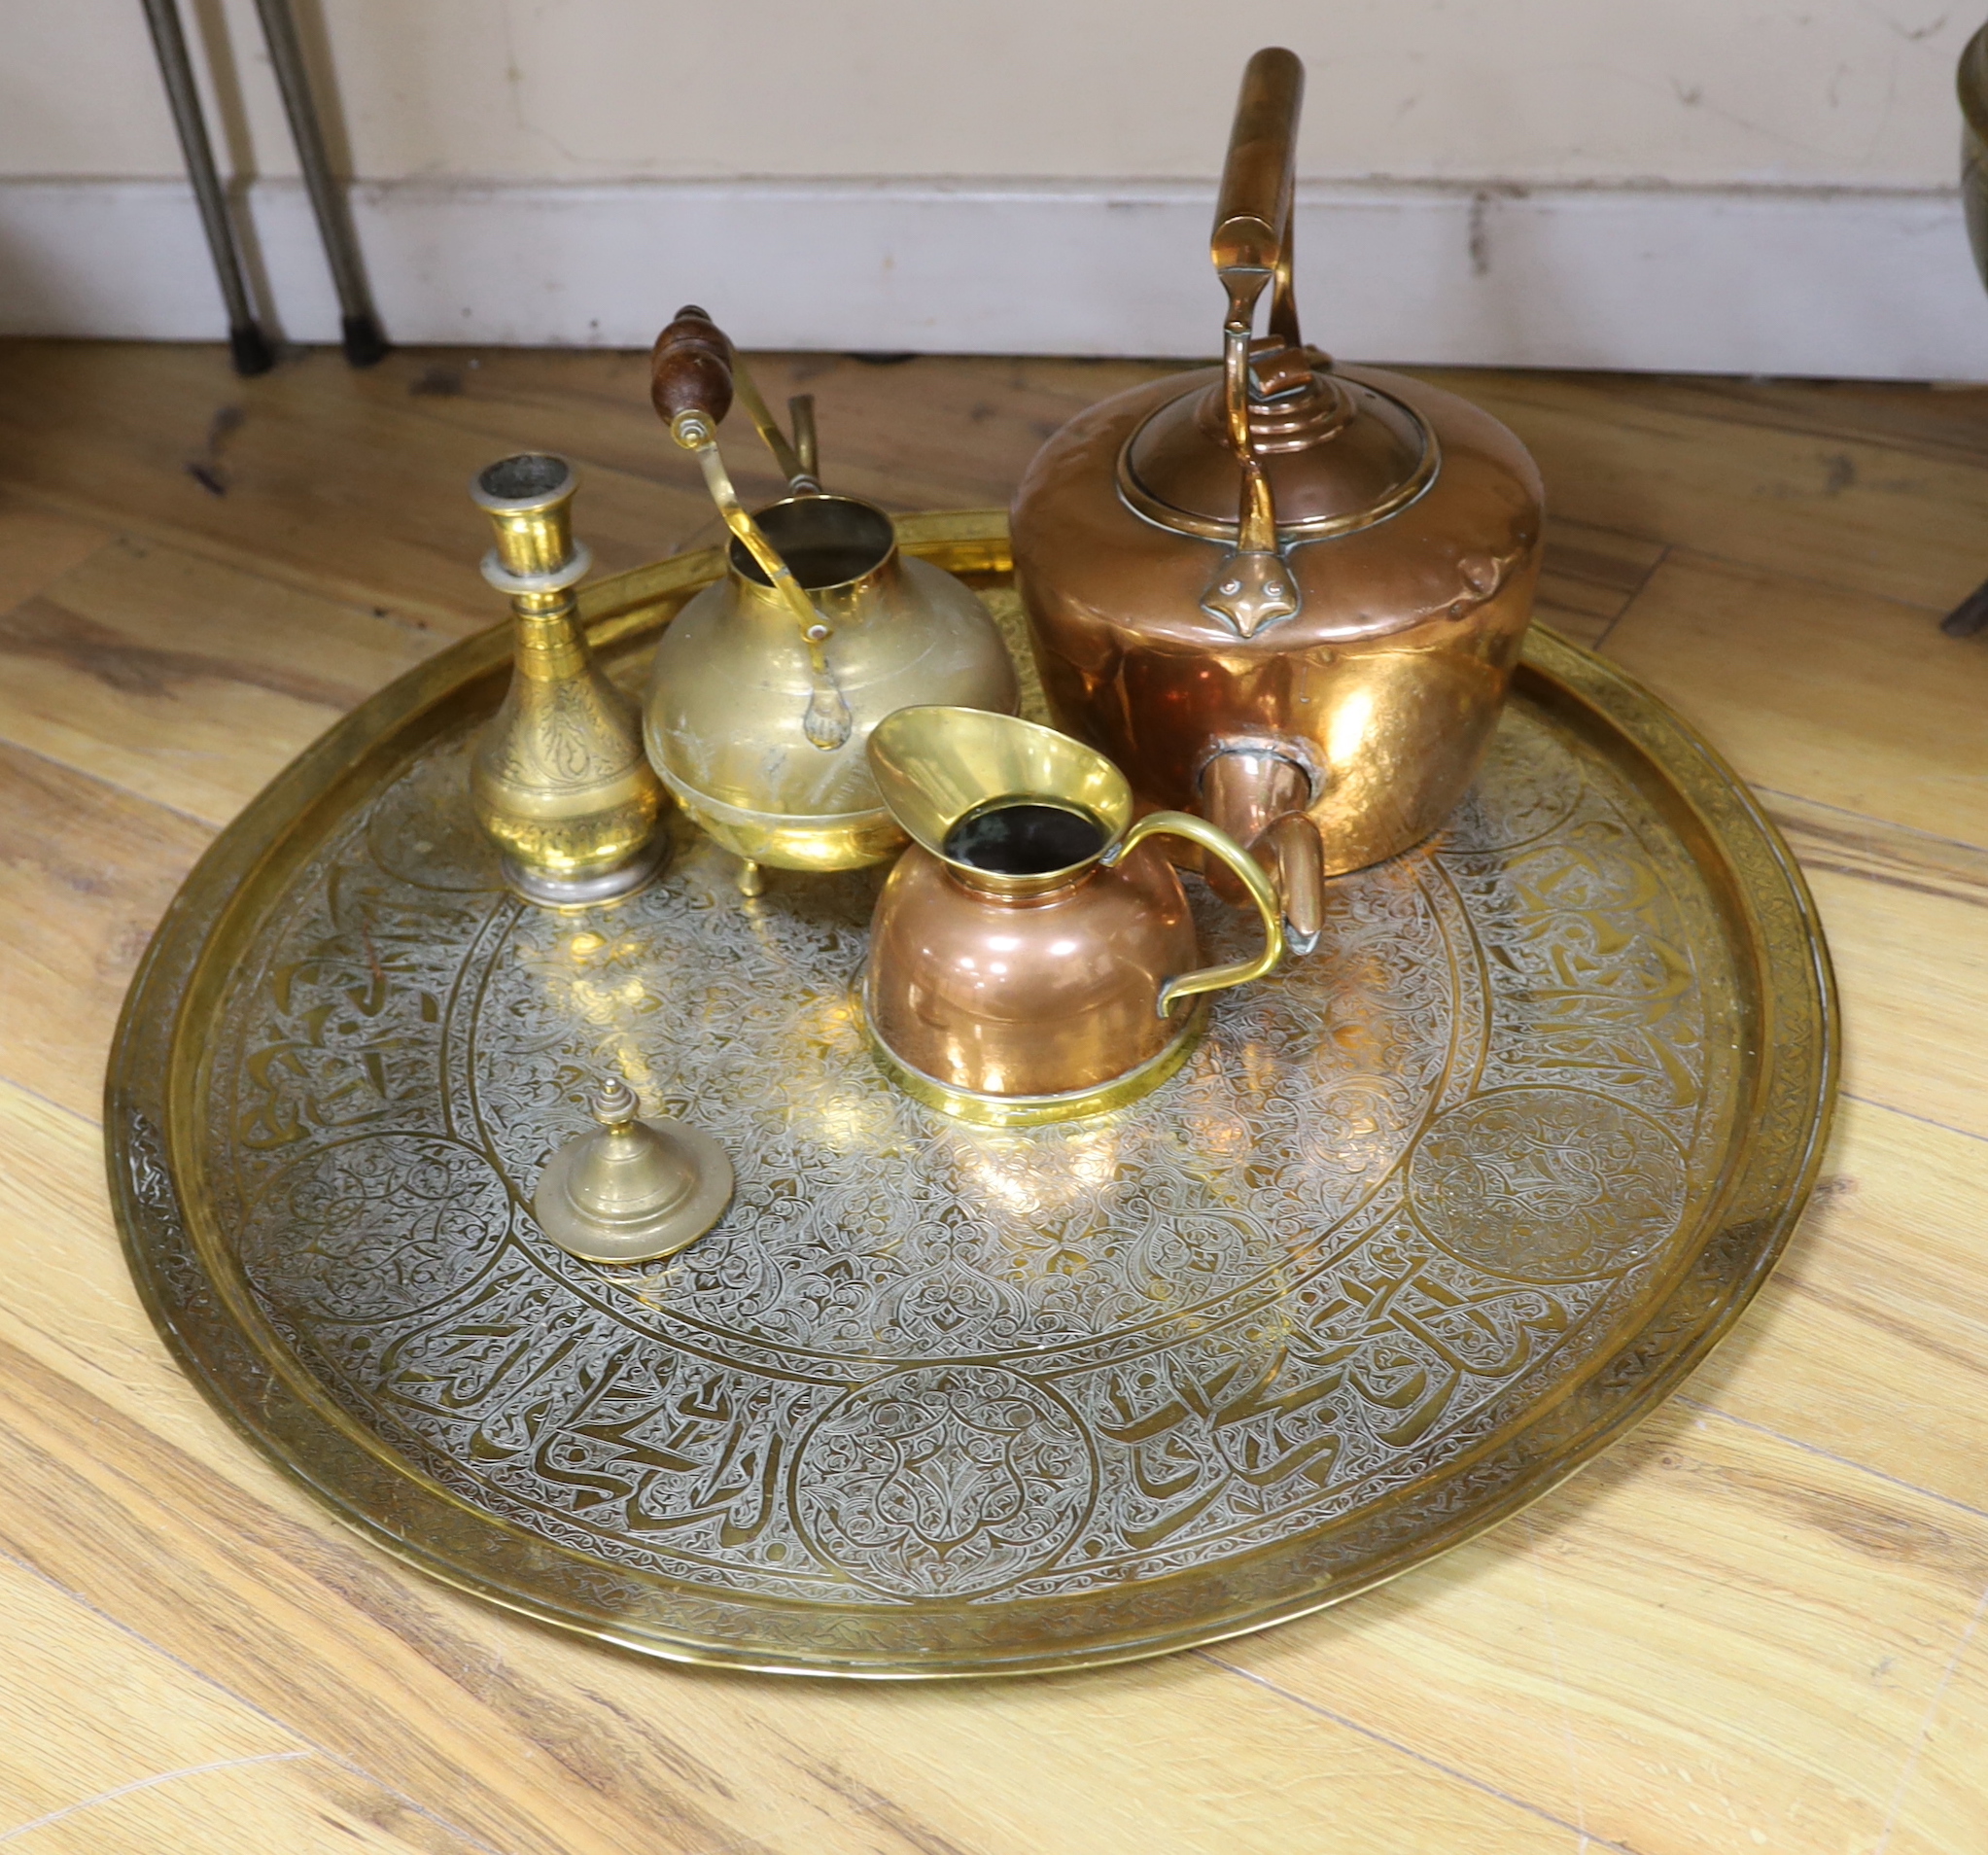 A brass cauldron shaped coal scuttle, a large circular tray, two kettles, a jug and a vase, tray 65cm diameter